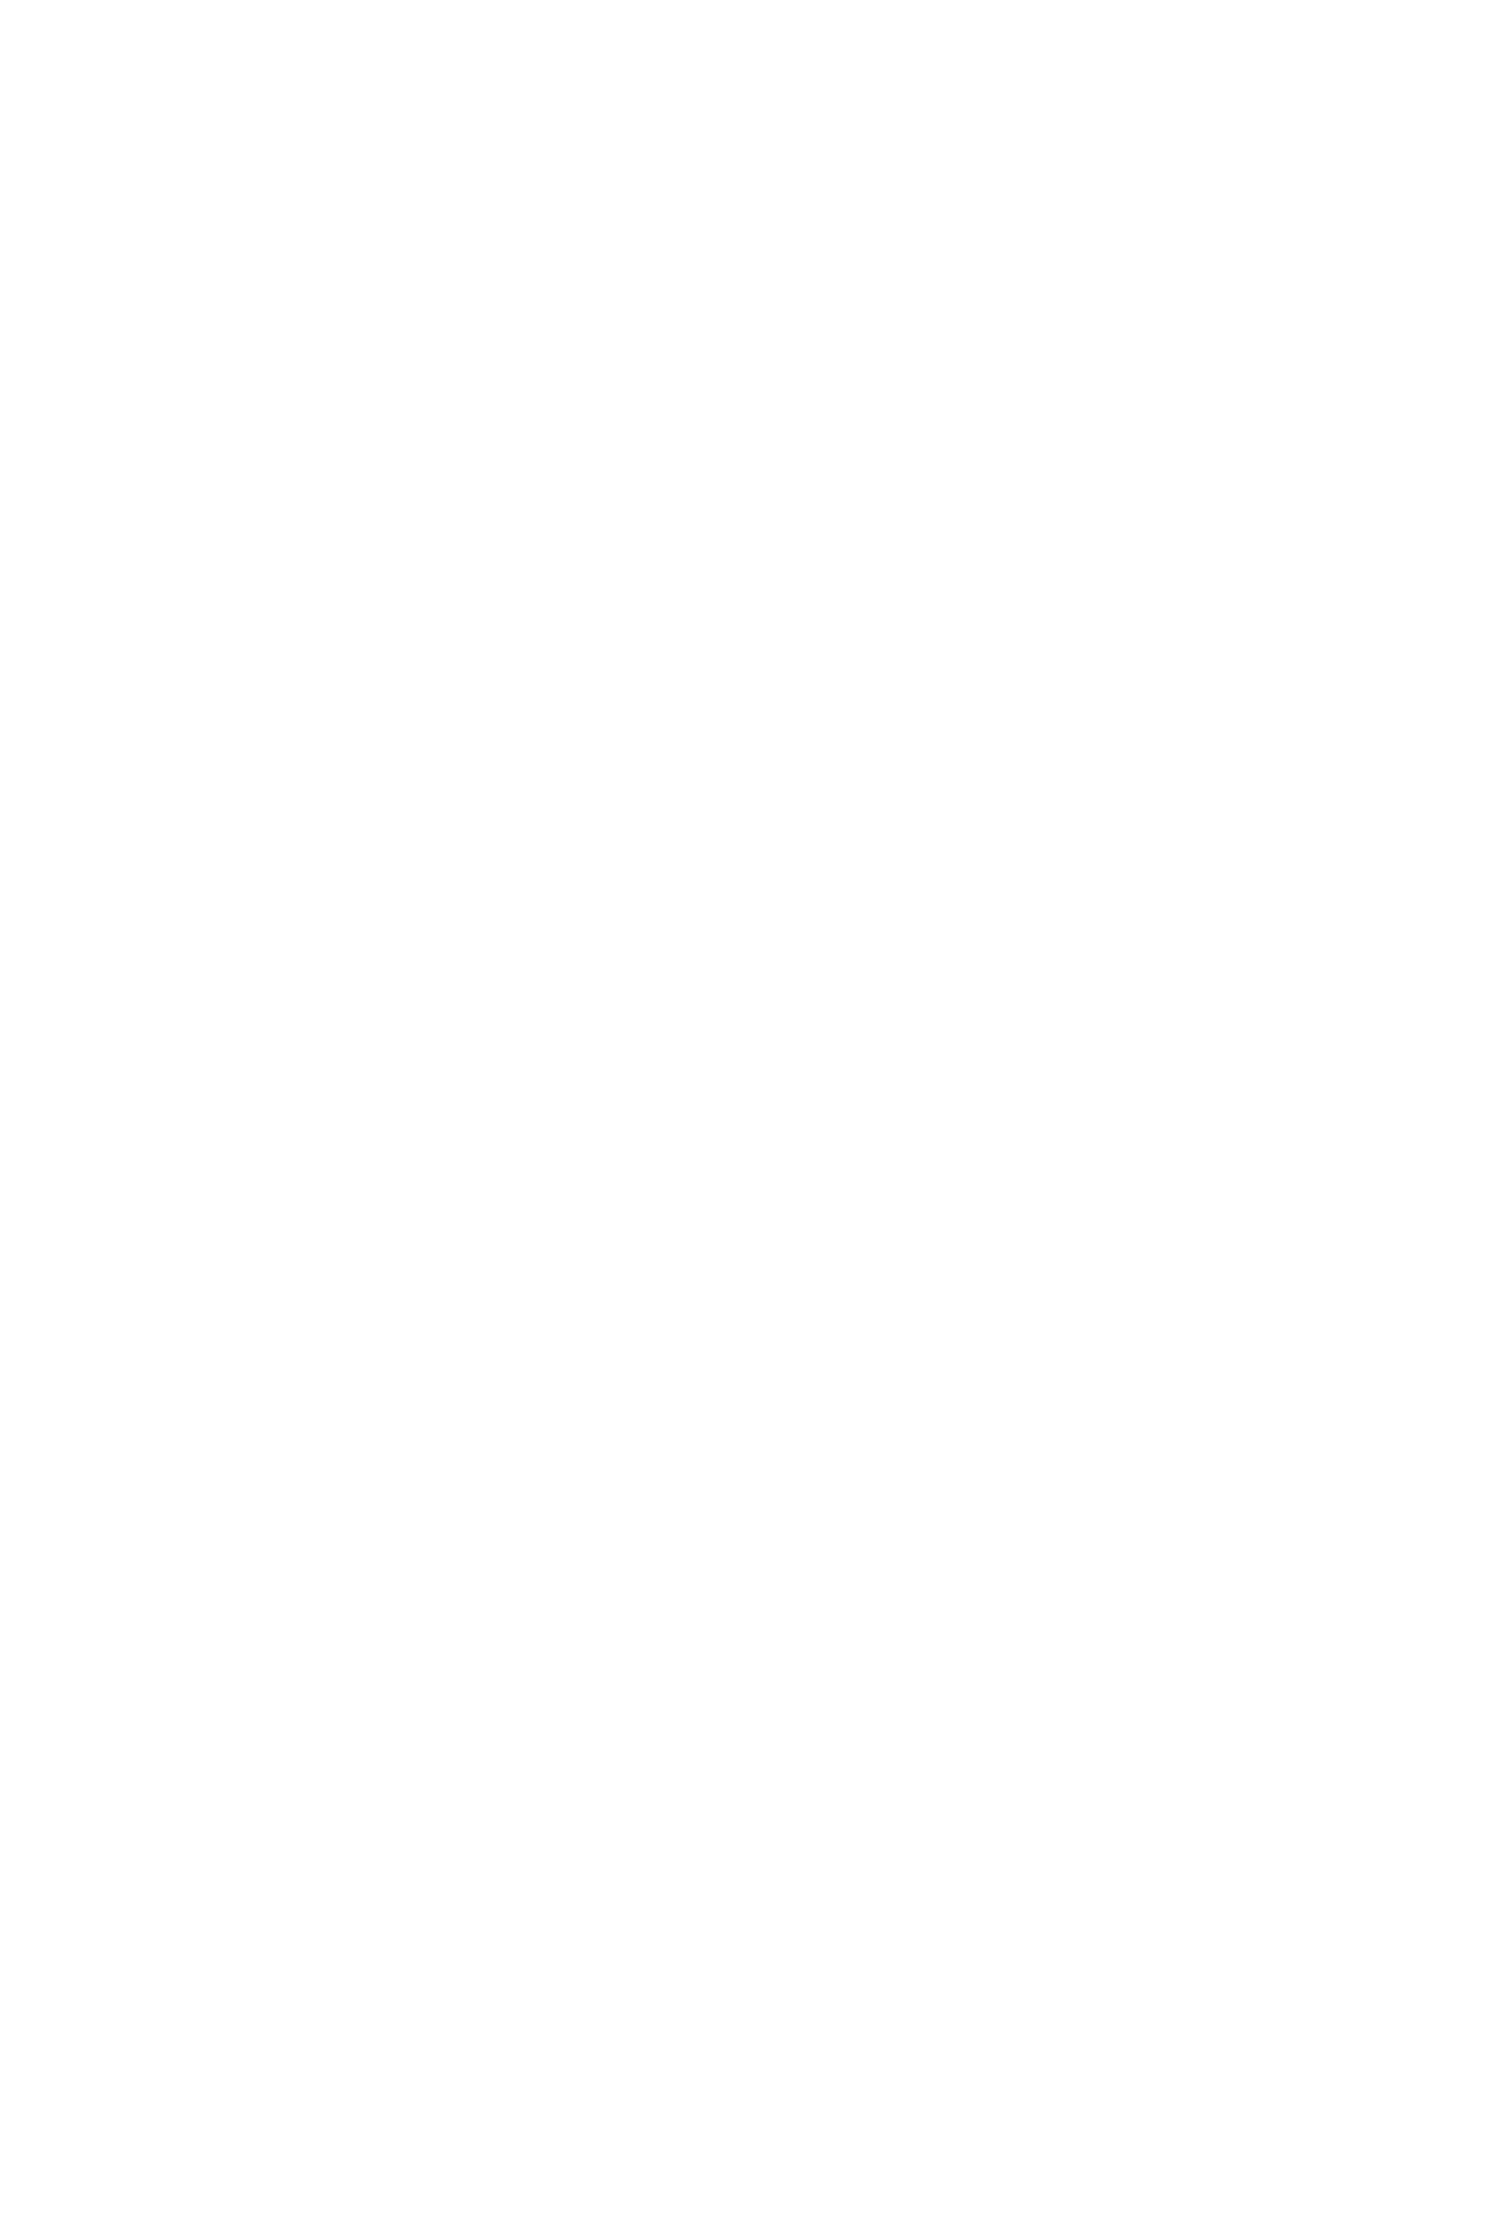 A Roam of Our Own - Solo Female Vanlife Gathering &amp; Event